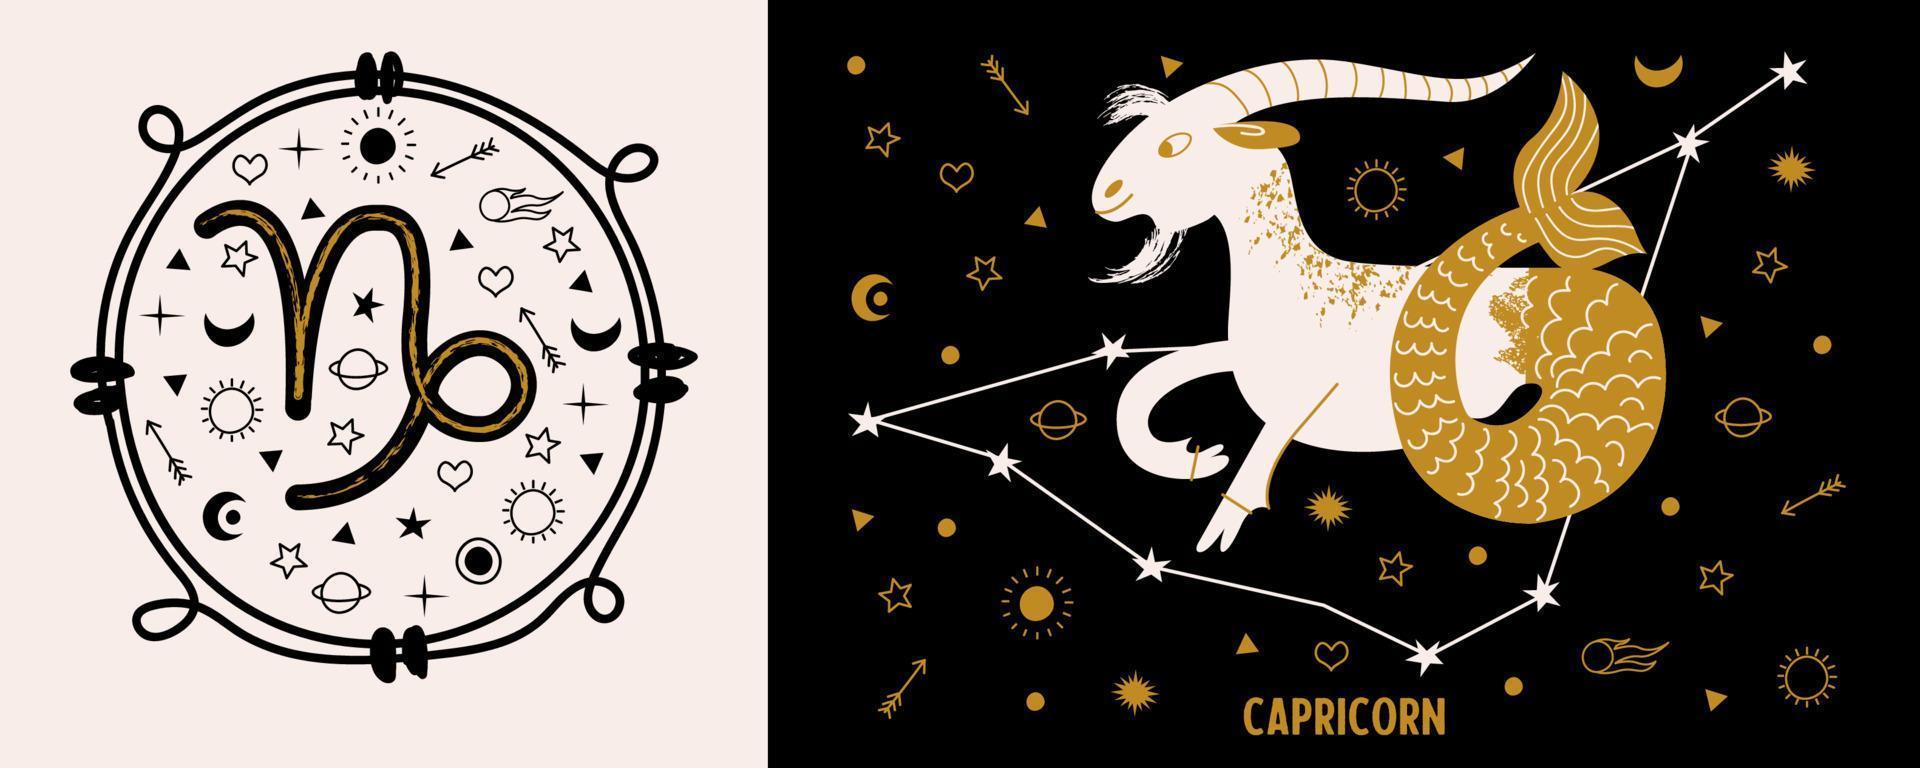 Capricorn is a sign of the zodiac. Horoscope and astrology. Vector illustration in a flat style.